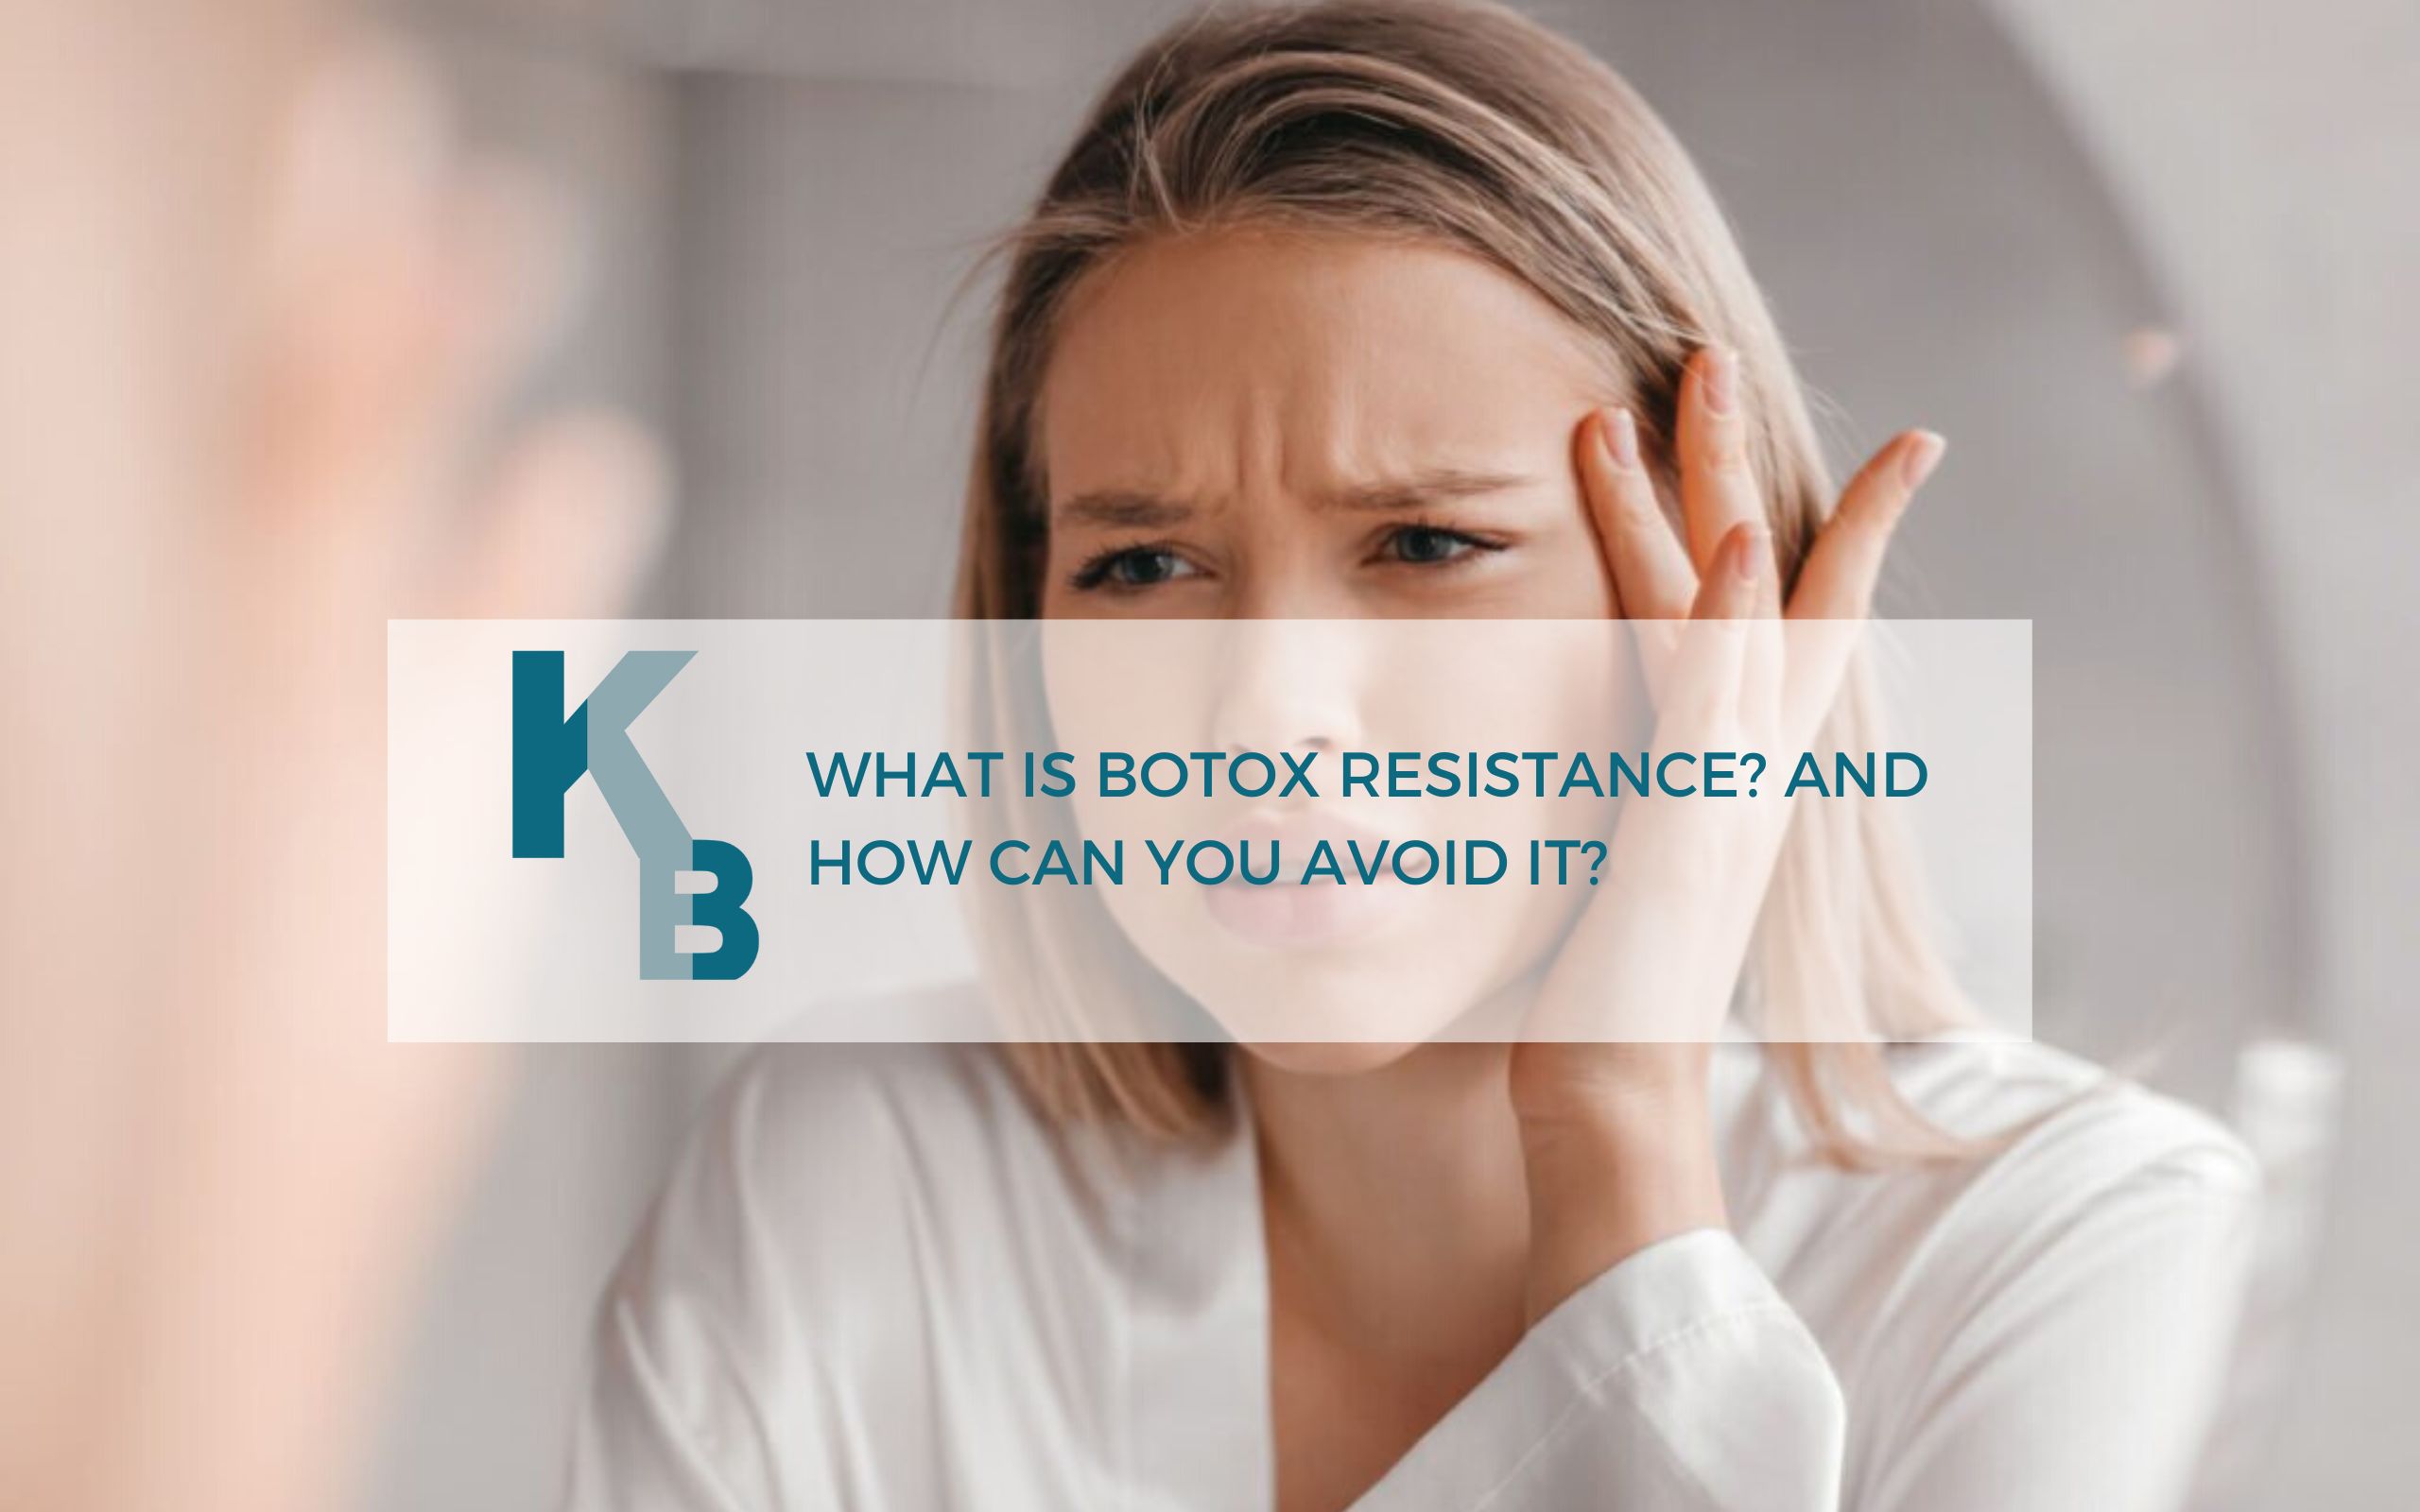 What is Botox resistance And how can you avoid it